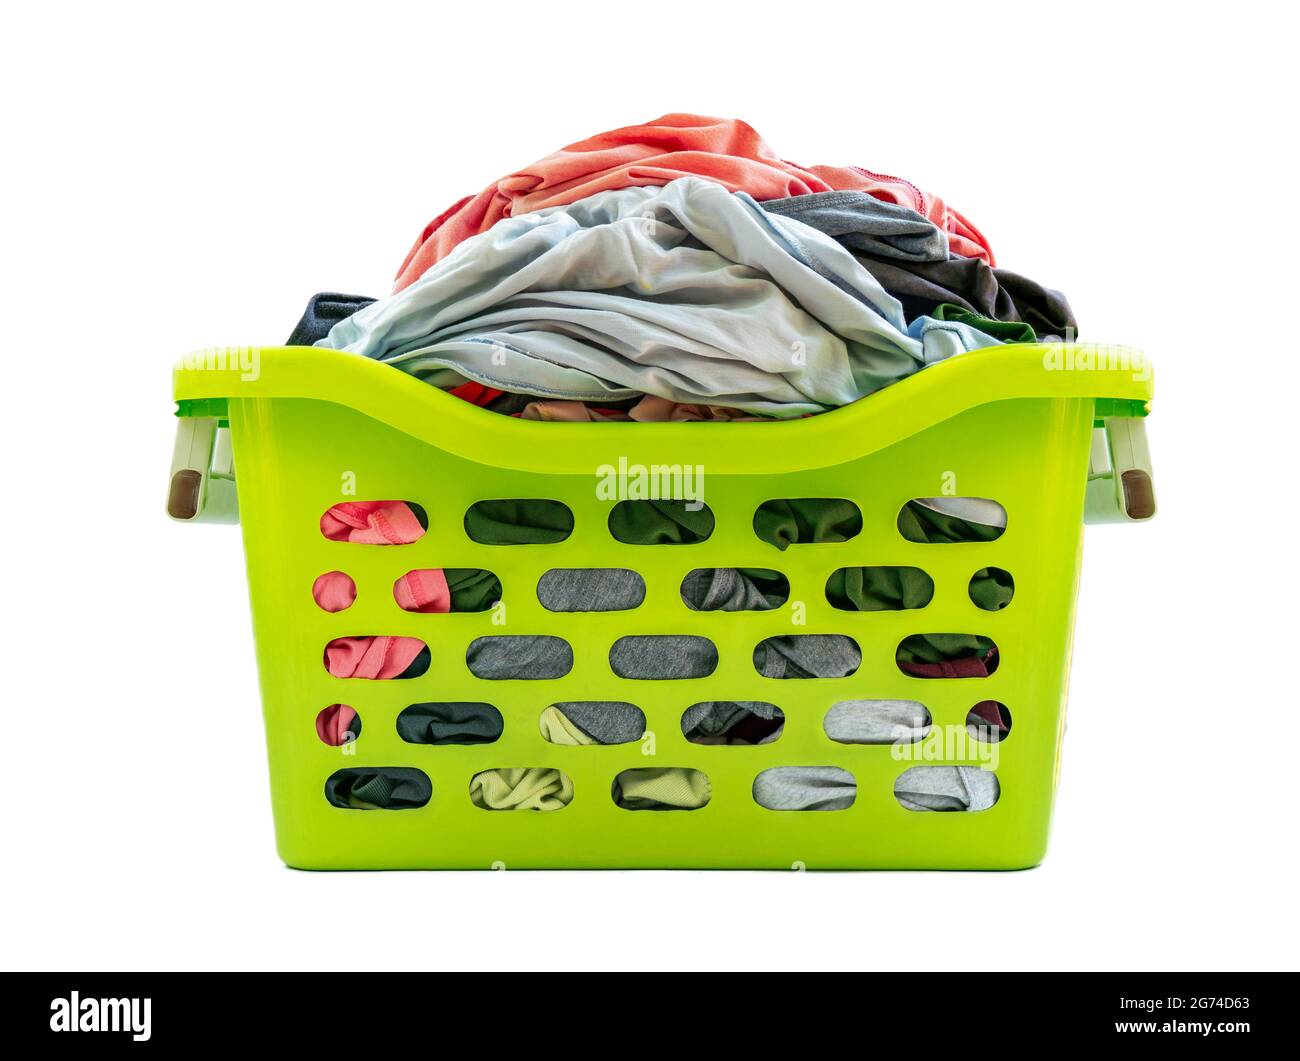 Isolated used cloth in plastic basket on white background, front view of green basket, clothes full in basket. Stock Photo